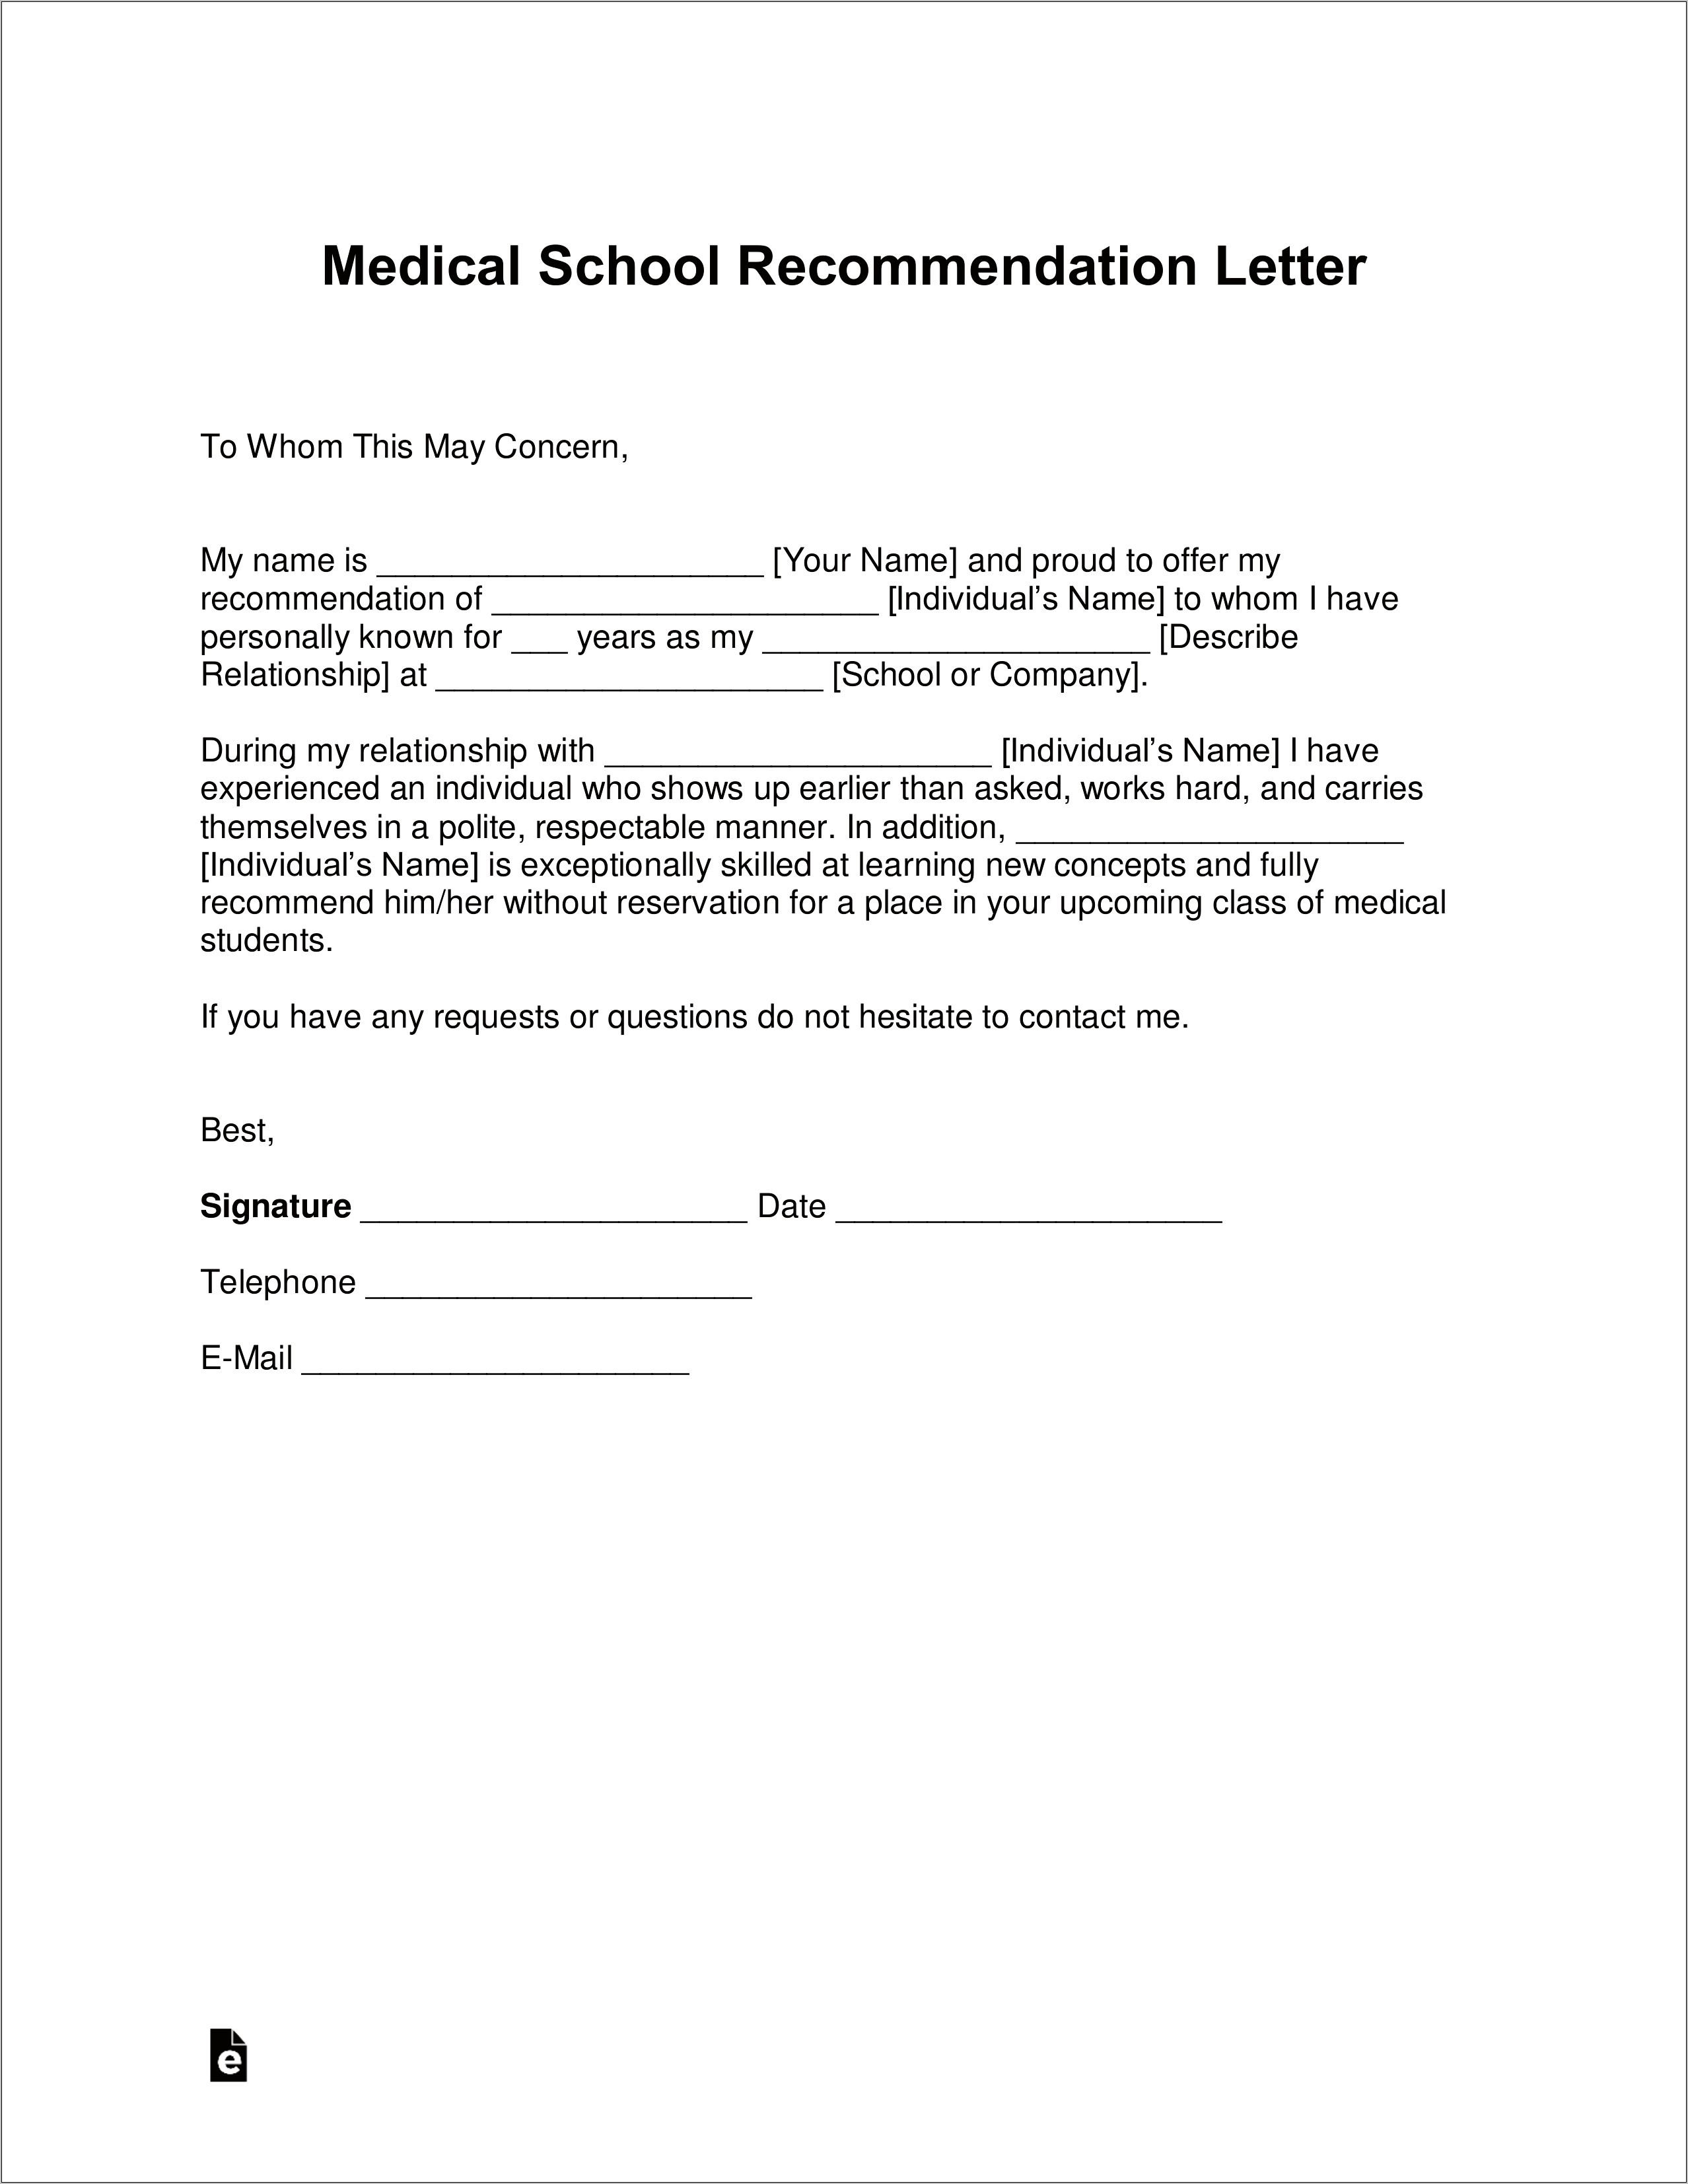 Submit Letter Of Recommendation With Resume